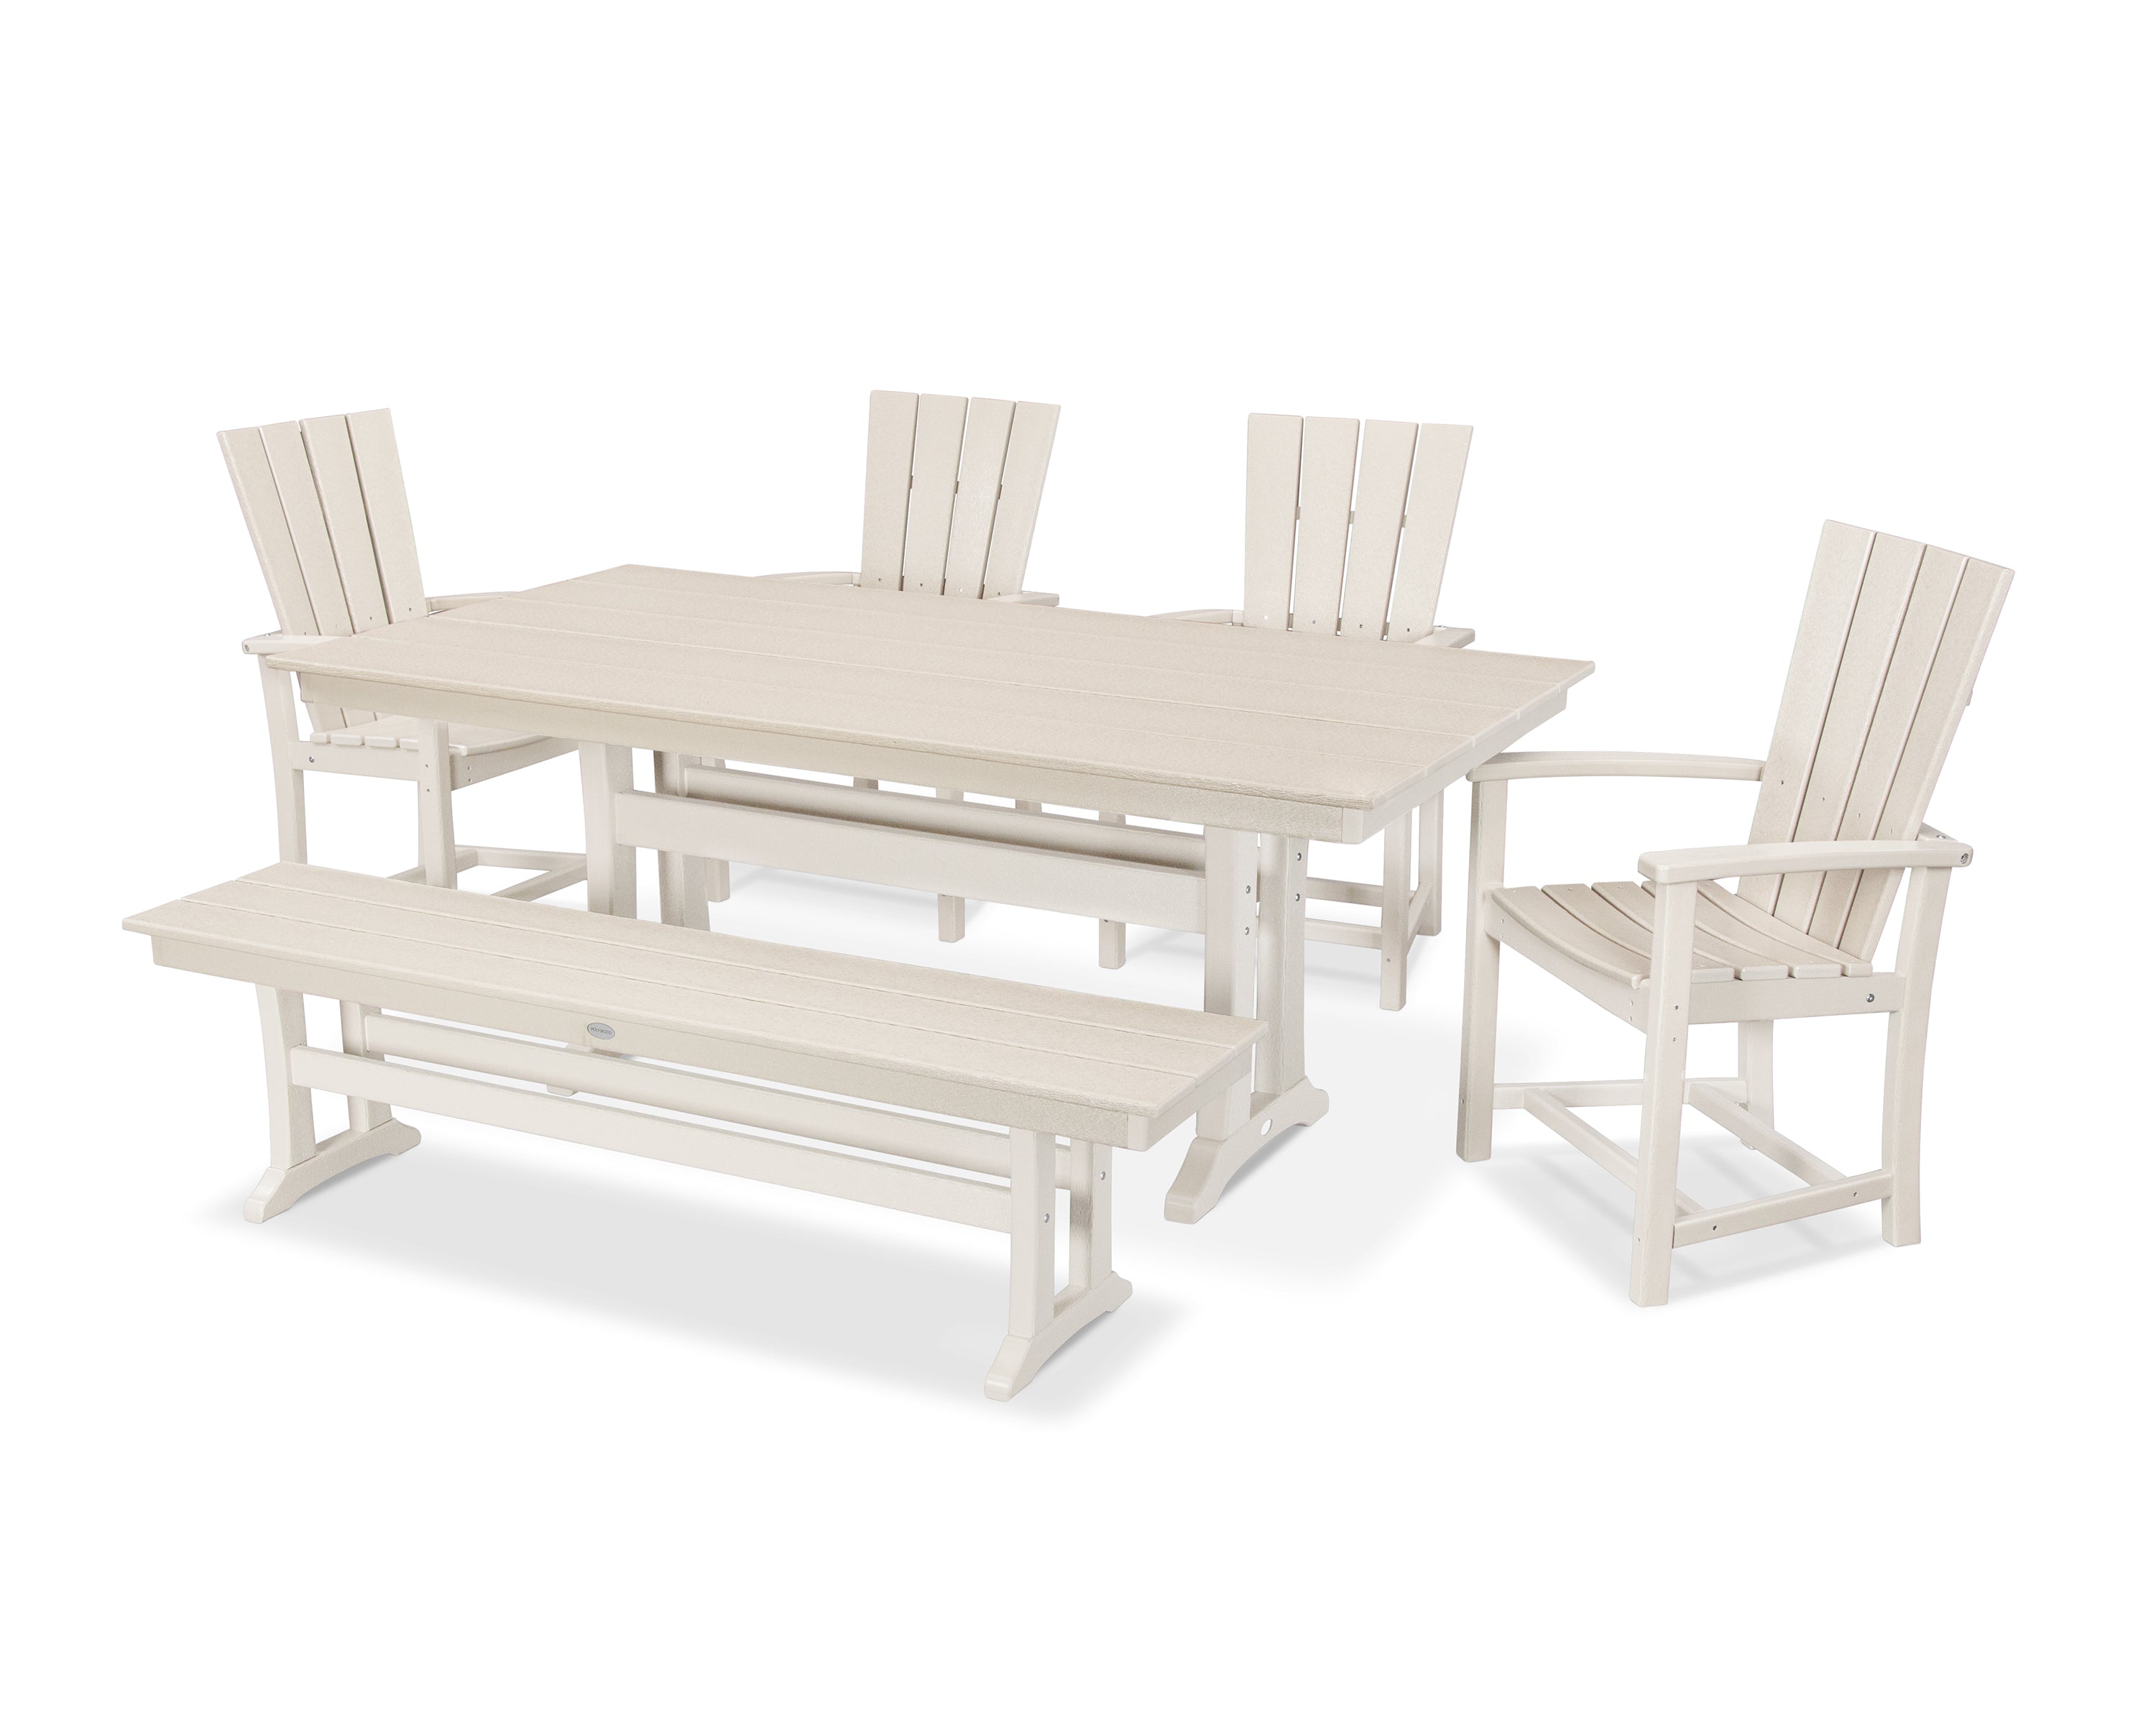 POLYWOOD® Quattro 6-Piece Farmhouse Dining Set with Trestle Legs and Bench in Sand